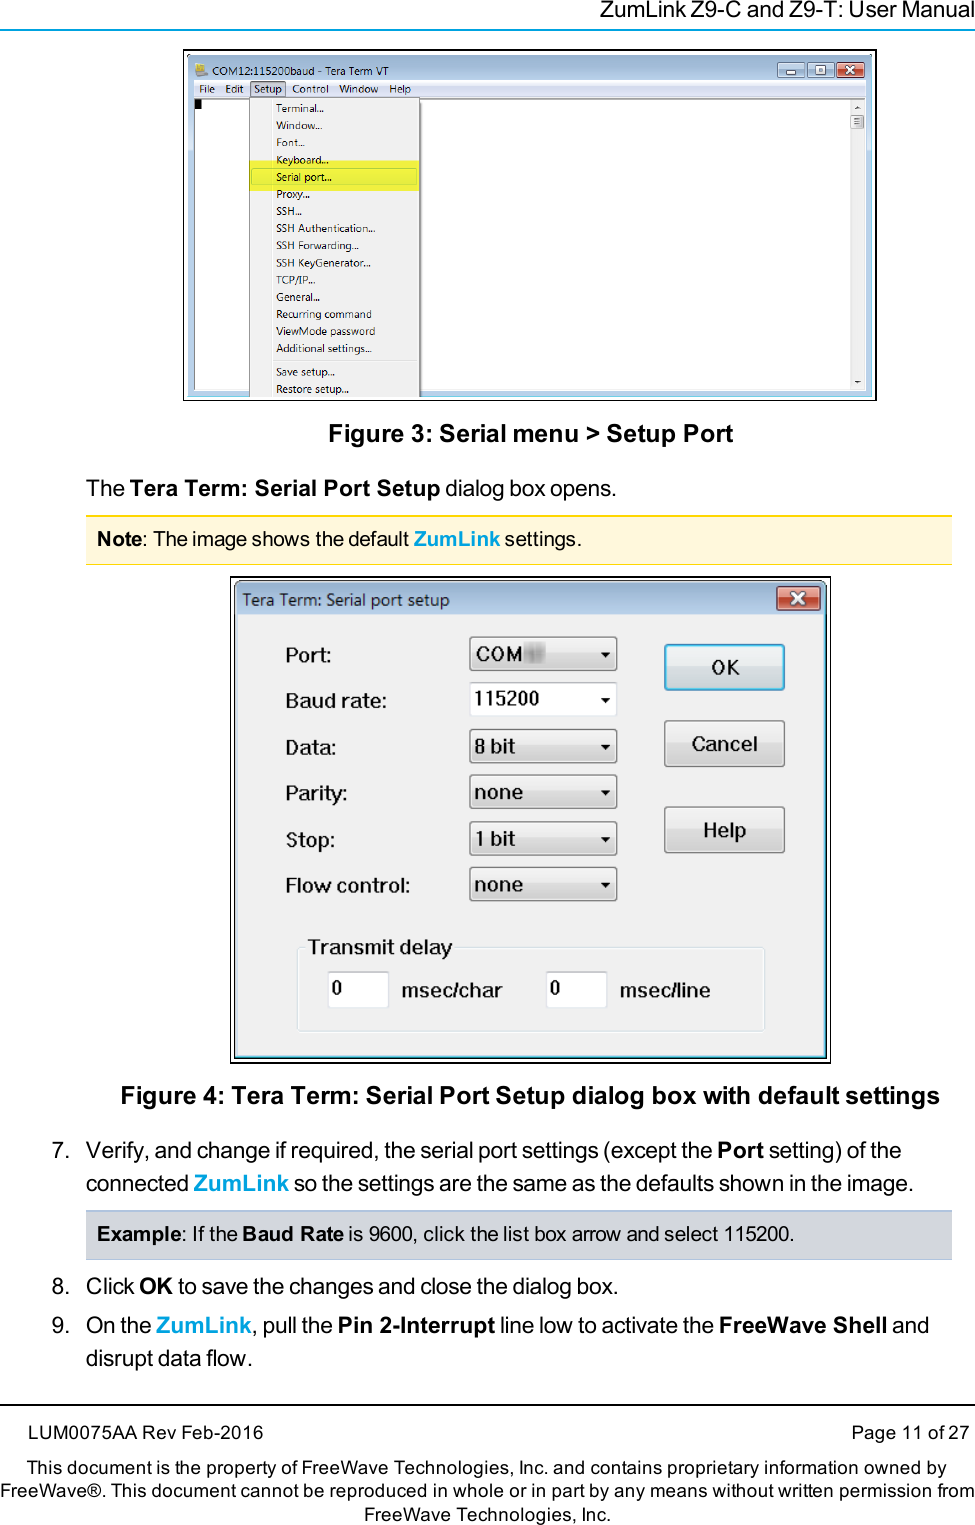 ZumLink Z9-C and Z9-T: User ManualFigure 3: Serial menu &gt; Setup PortThe Tera Term: Serial Port Setup dialog box opens.Note: The image shows the default ZumLink settings.Figure 4: Tera Term: Serial Port Setup dialog box with default settings7. Verify, and change if required, the serial port settings (except the Port setting) of theconnected ZumLink so the settings are the same as the defaults shown in the image.Example: If the Baud Rate is 9600, click the list box arrow and select 115200.8. Click OK to save the changes and close the dialog box.9. On the ZumLink, pull the Pin 2-Interrupt line low to activate the FreeWave Shell anddisrupt data flow.LUM0075AA Rev Feb-2016 Page 11 of 27This document is the property of FreeWave Technologies, Inc. and contains proprietary information owned byFreeWave®. This document cannot be reproduced in whole or in part by any means without written permission fromFreeWave Technologies, Inc.